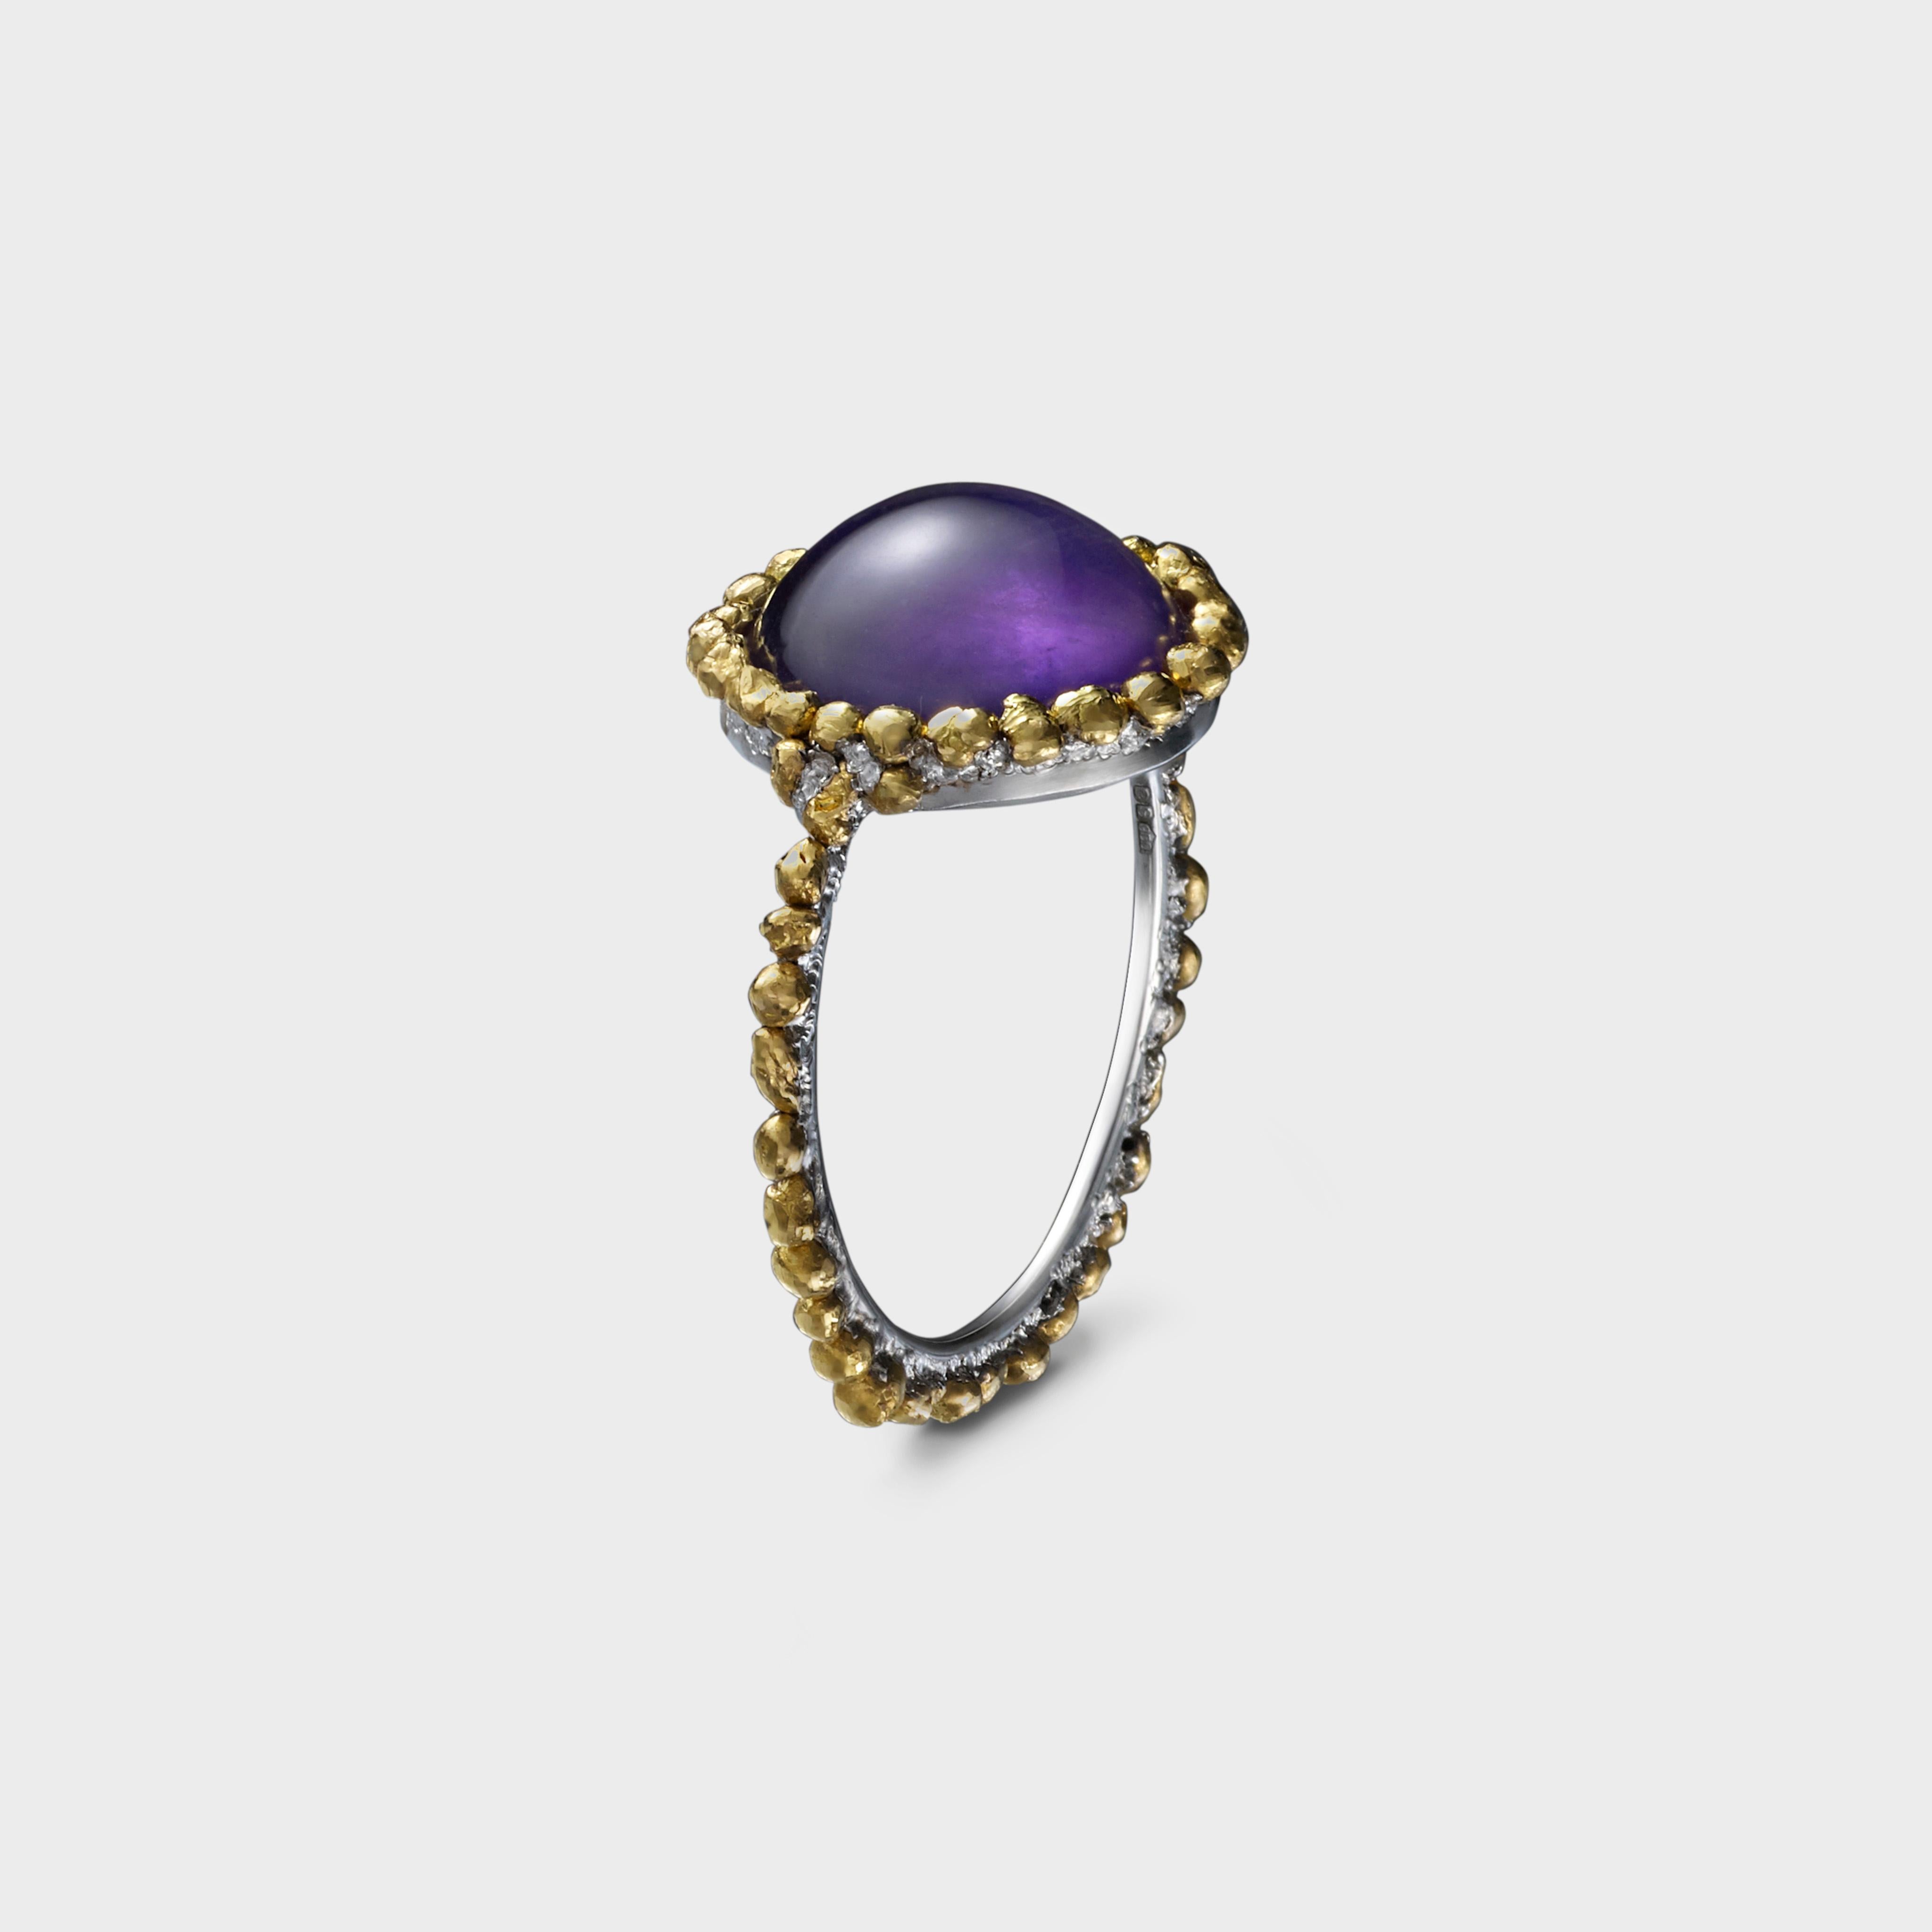 A beautiful natural amethyst surrounded by a raw halo of 24 karat gold beads bonded to platinum combining strength with organic beauty. 

This ring is part of Saisons, a playful collection inspired by the natural beauty of coloured stones that